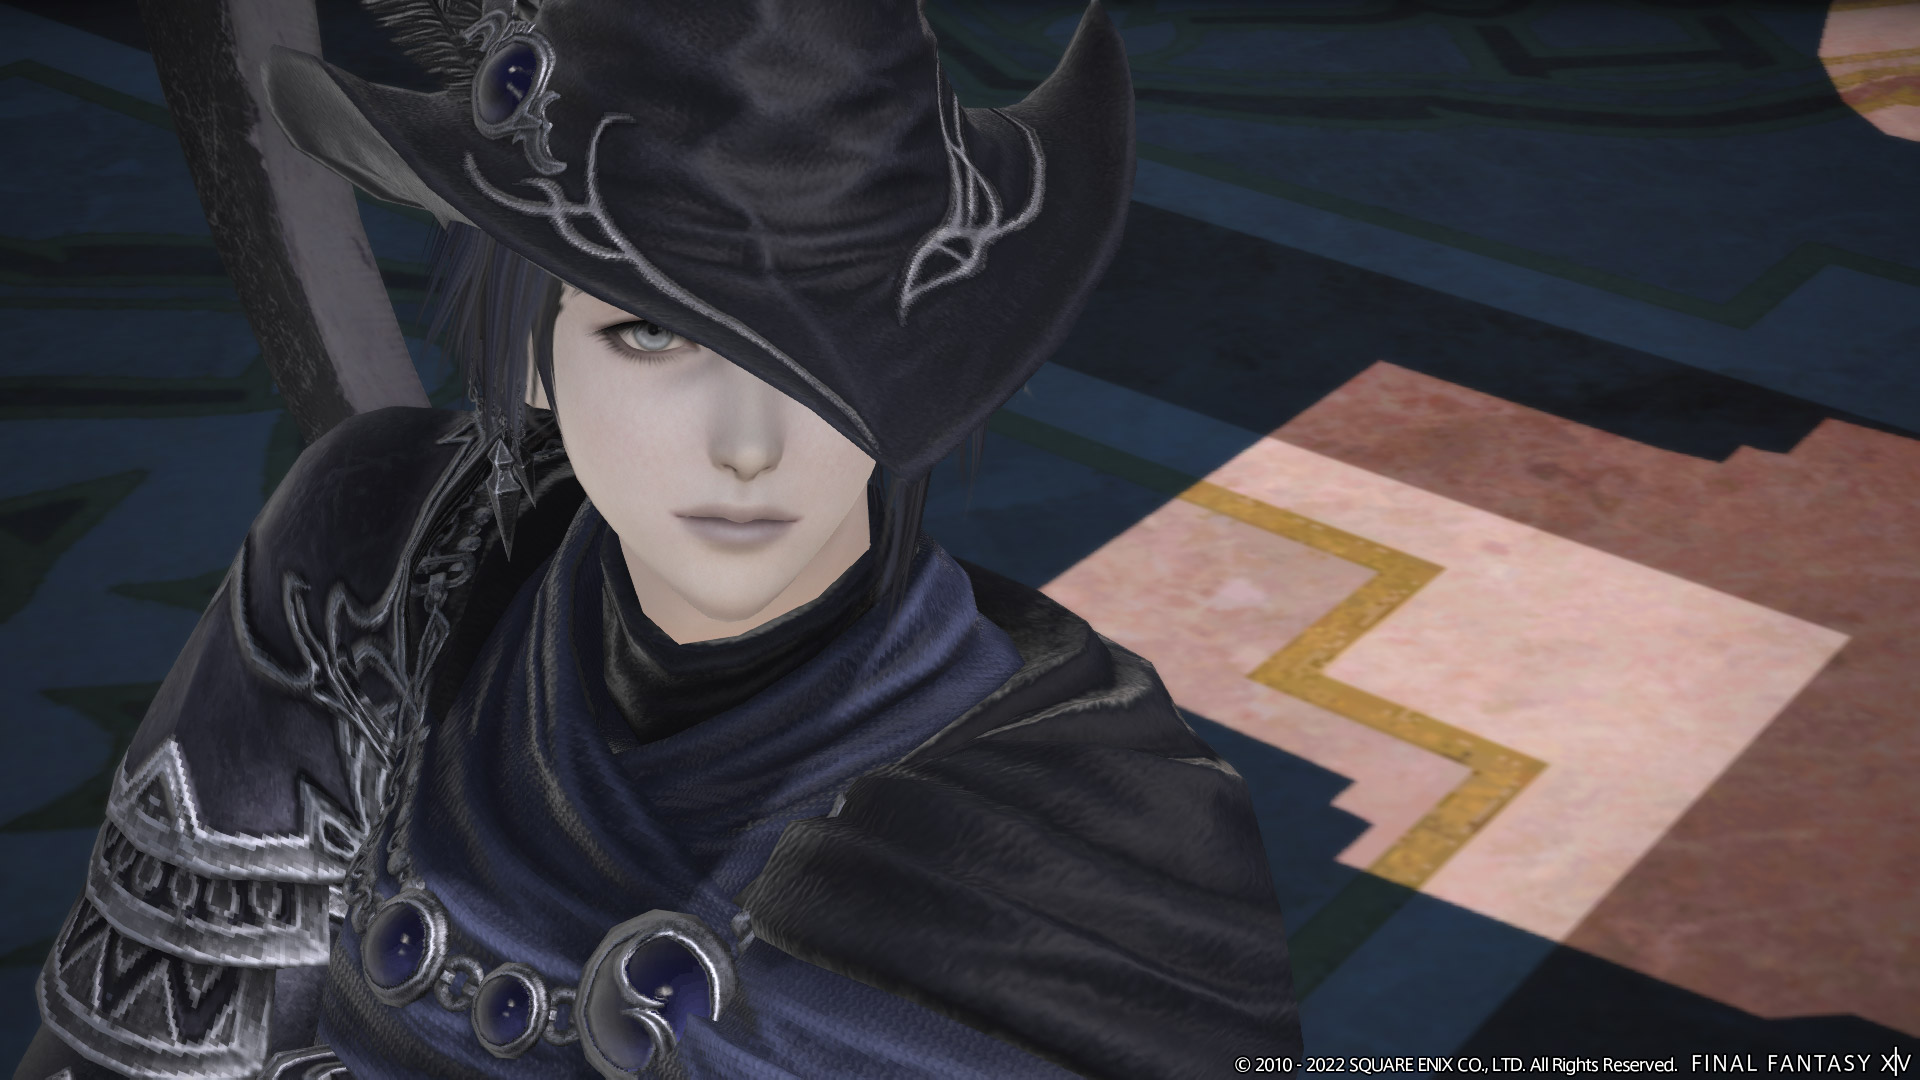 Final Fantasy XIV will soon demolish your house if you're idle for too long